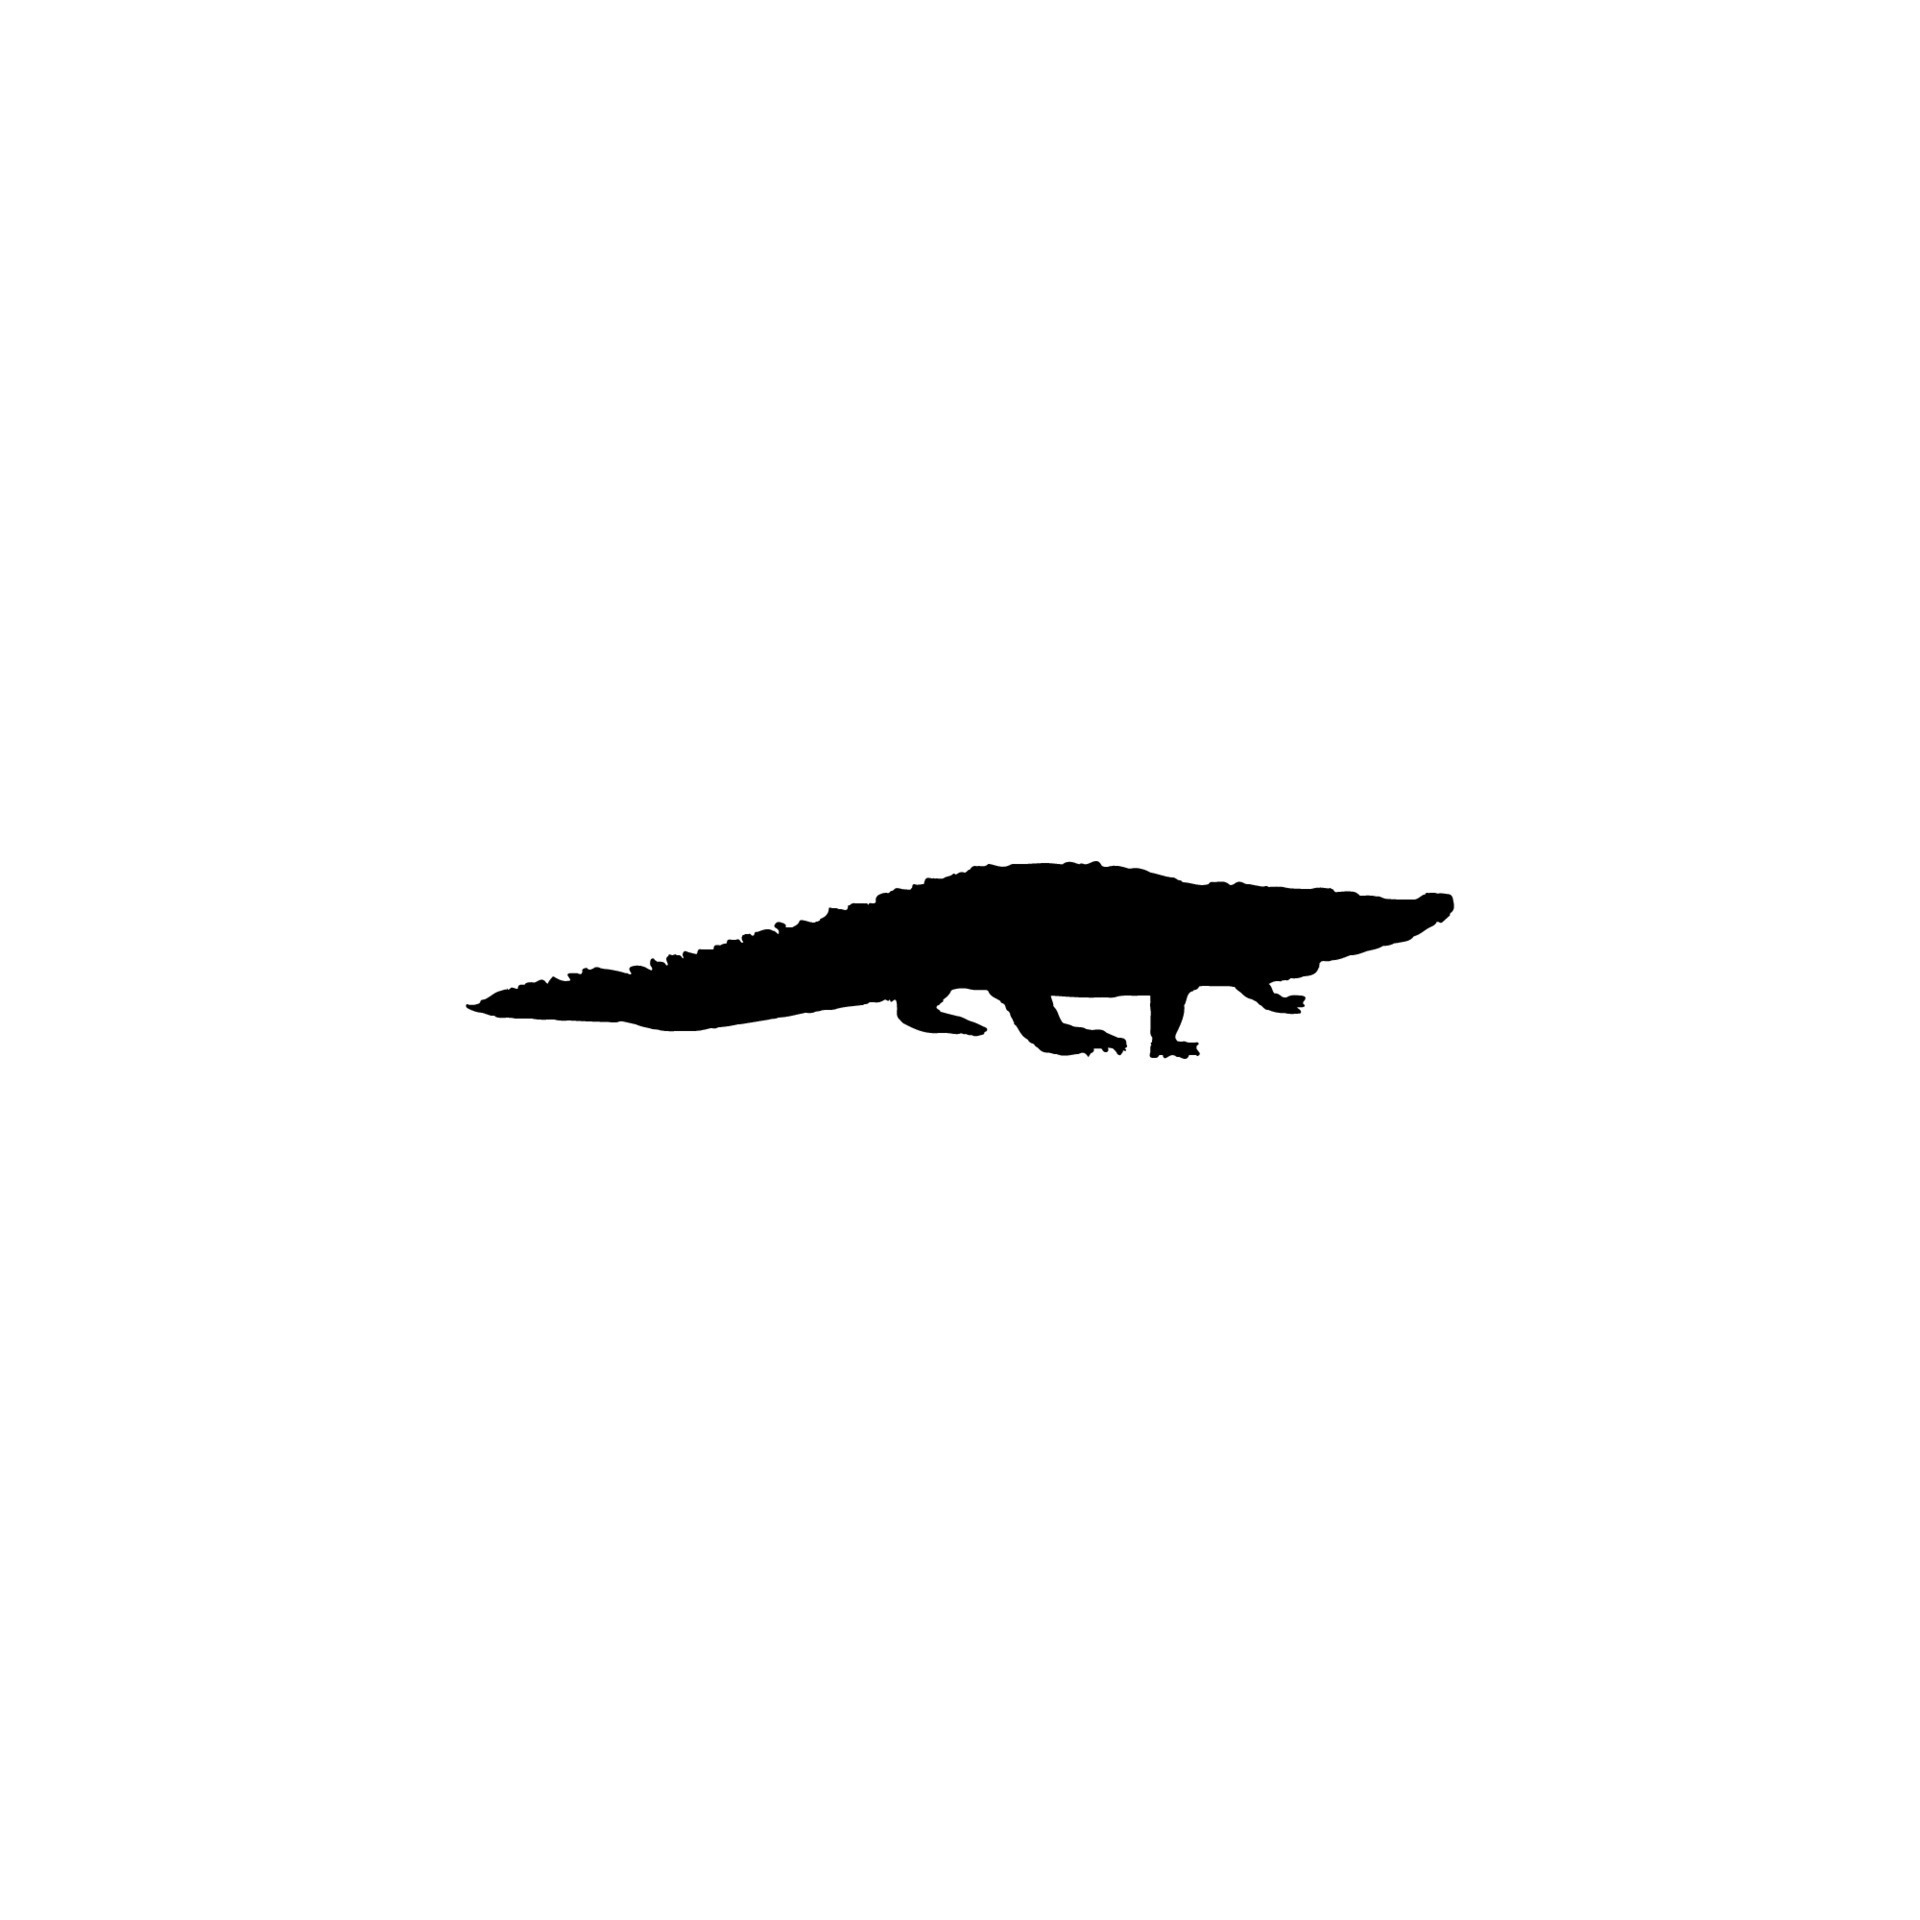 Crocodile icon. Simple style zoology science poster background